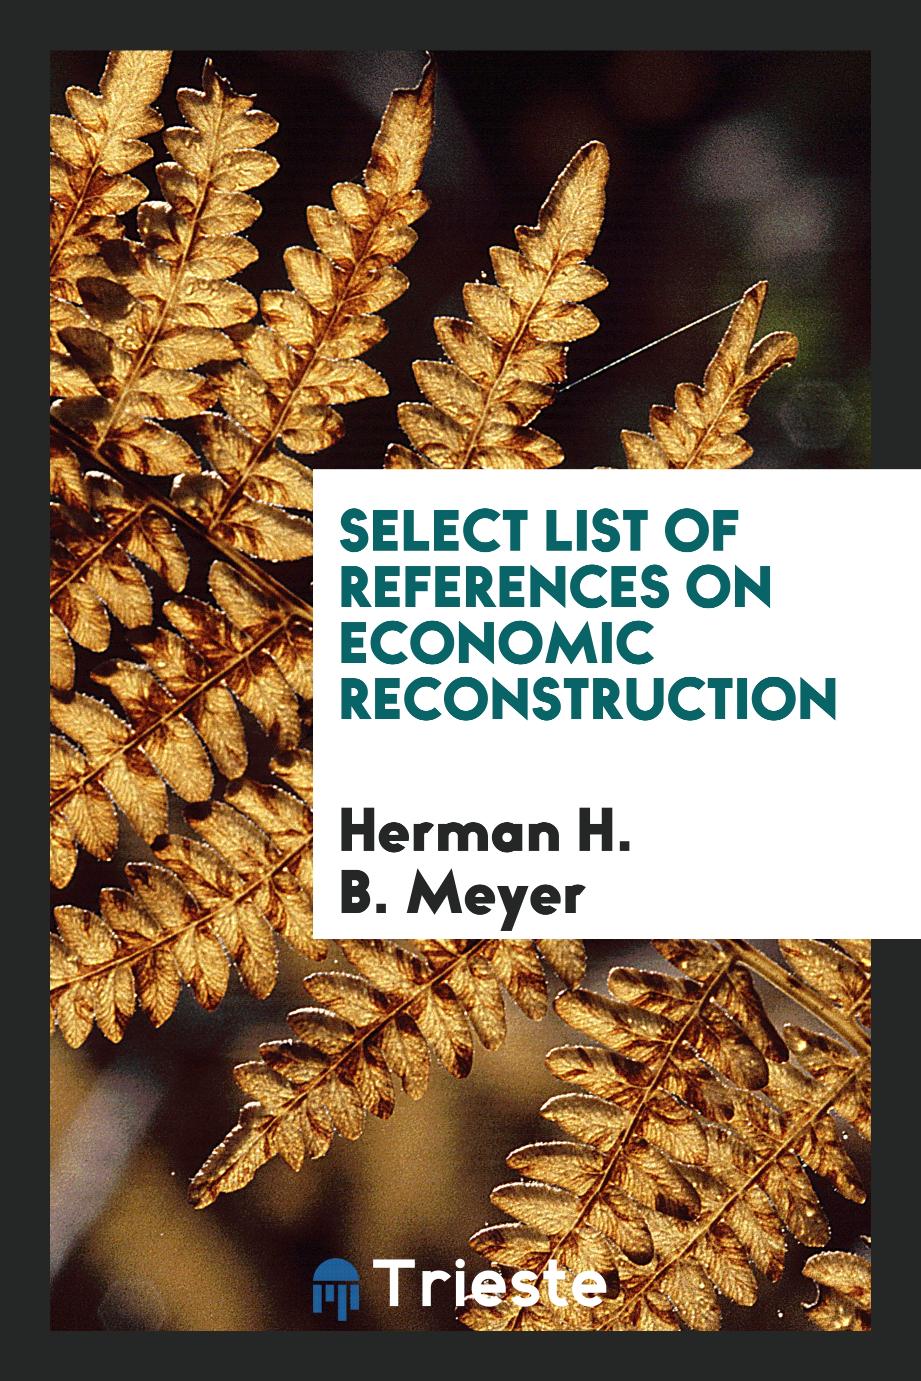 Select list of references on economic reconstruction